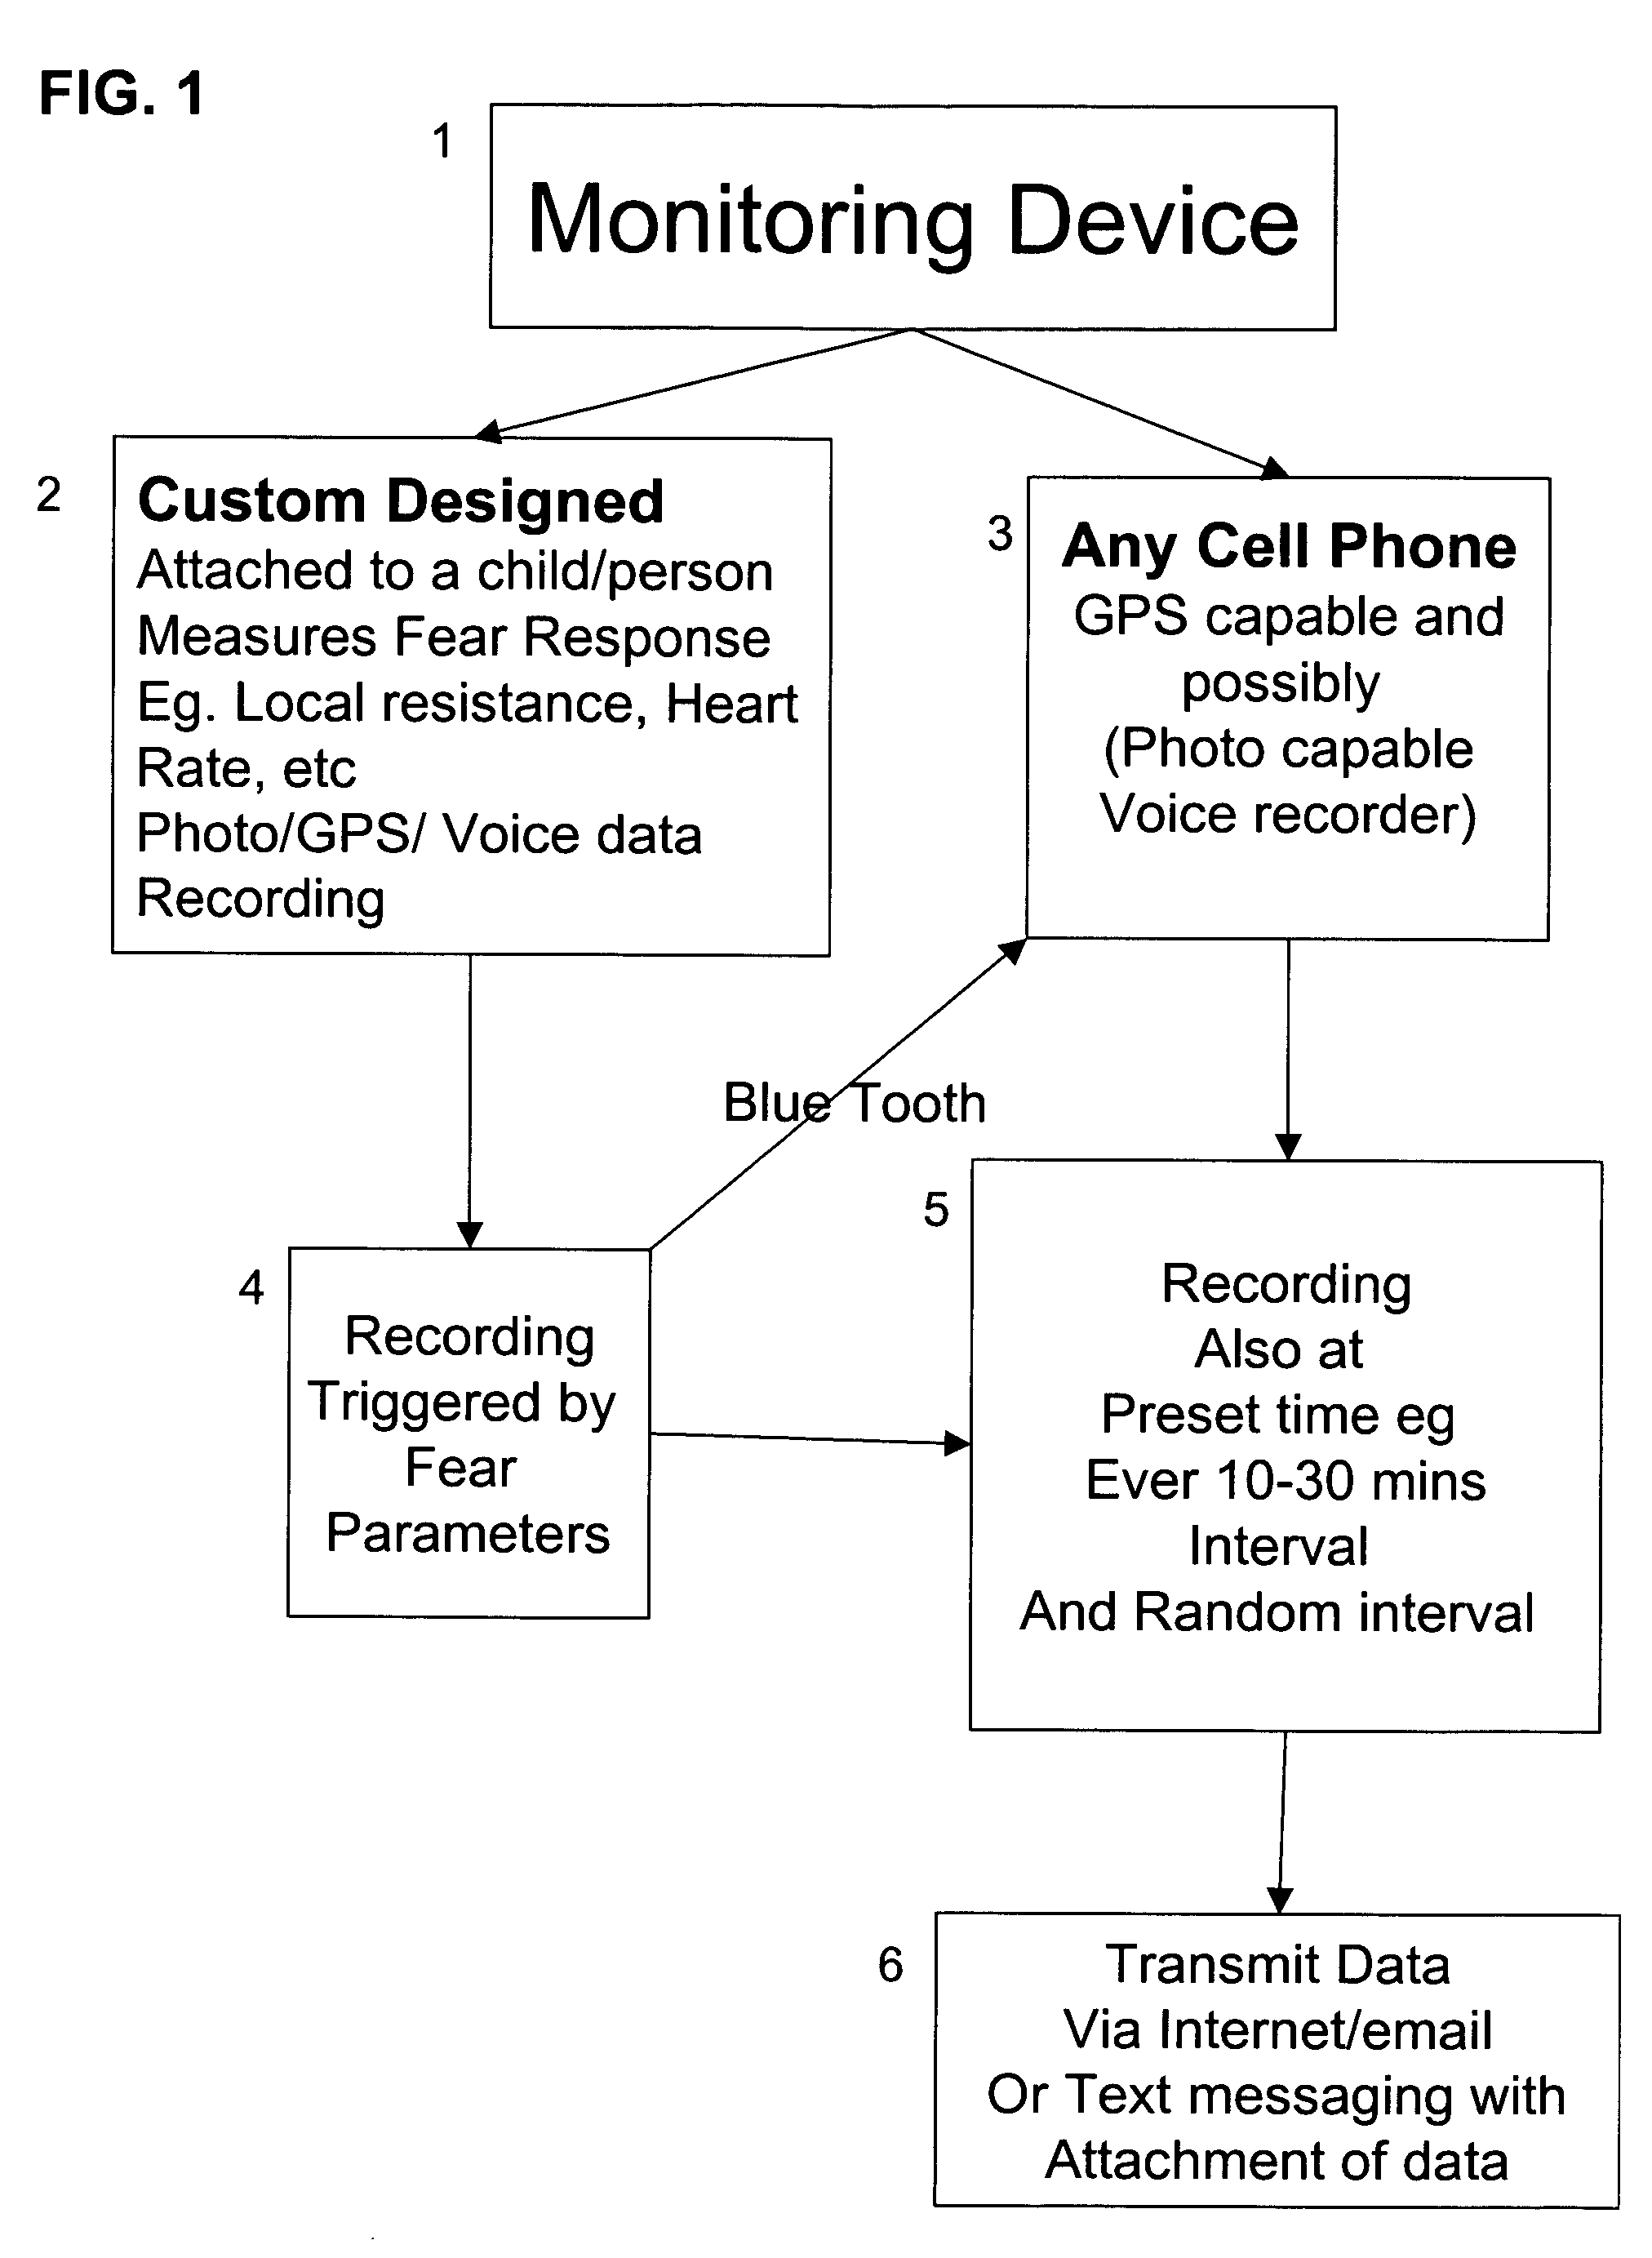 Systems and methods for remote monitoring of fear and distress responses